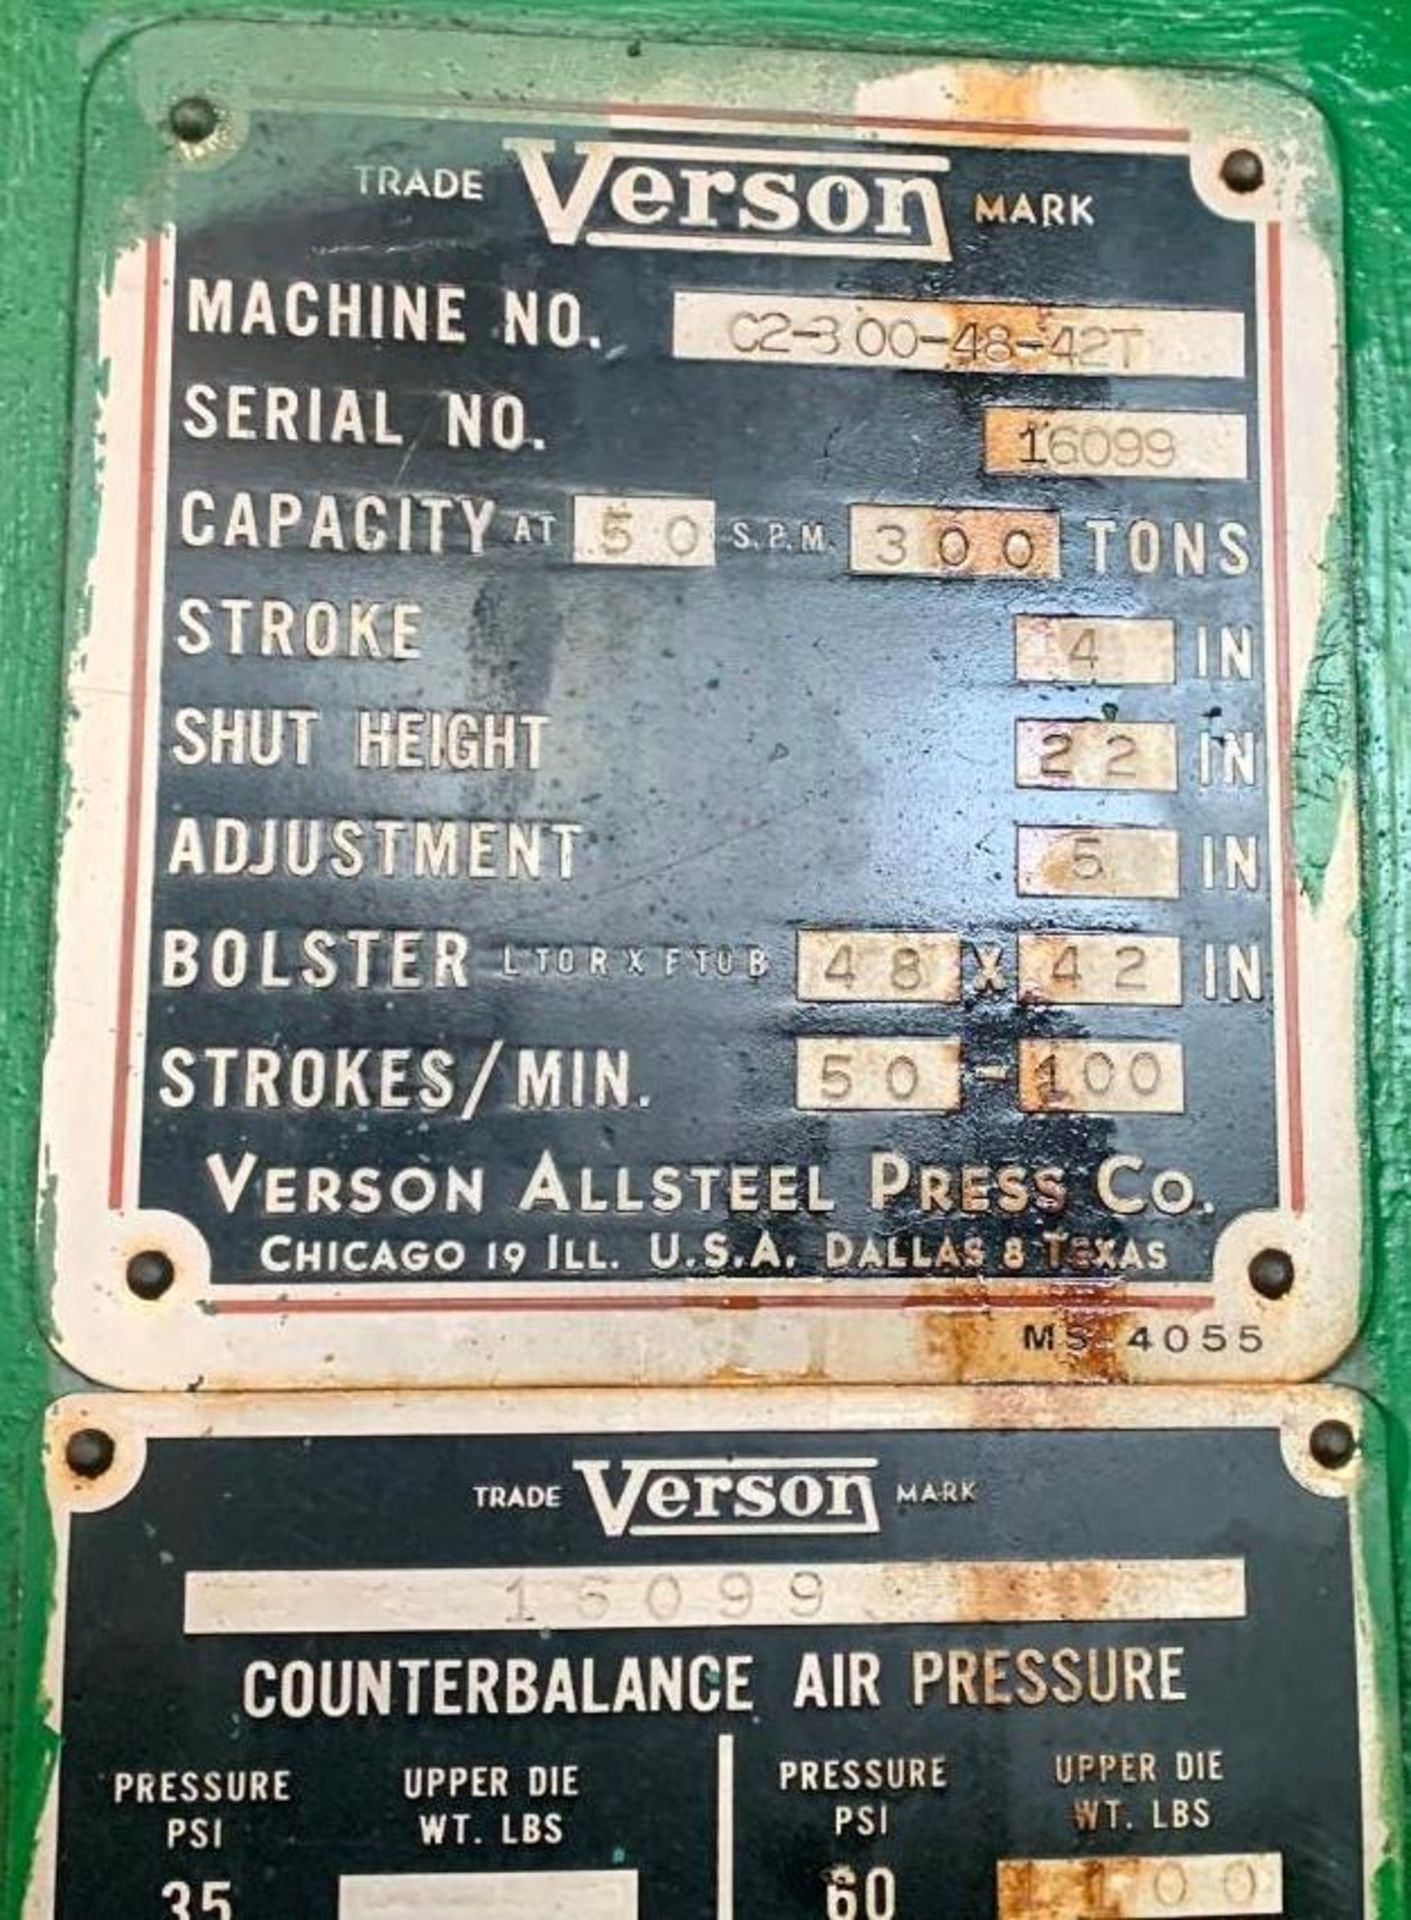 300 Ton Verson #C2-300-48-42T Variable Speed SS Press - Image 5 of 7